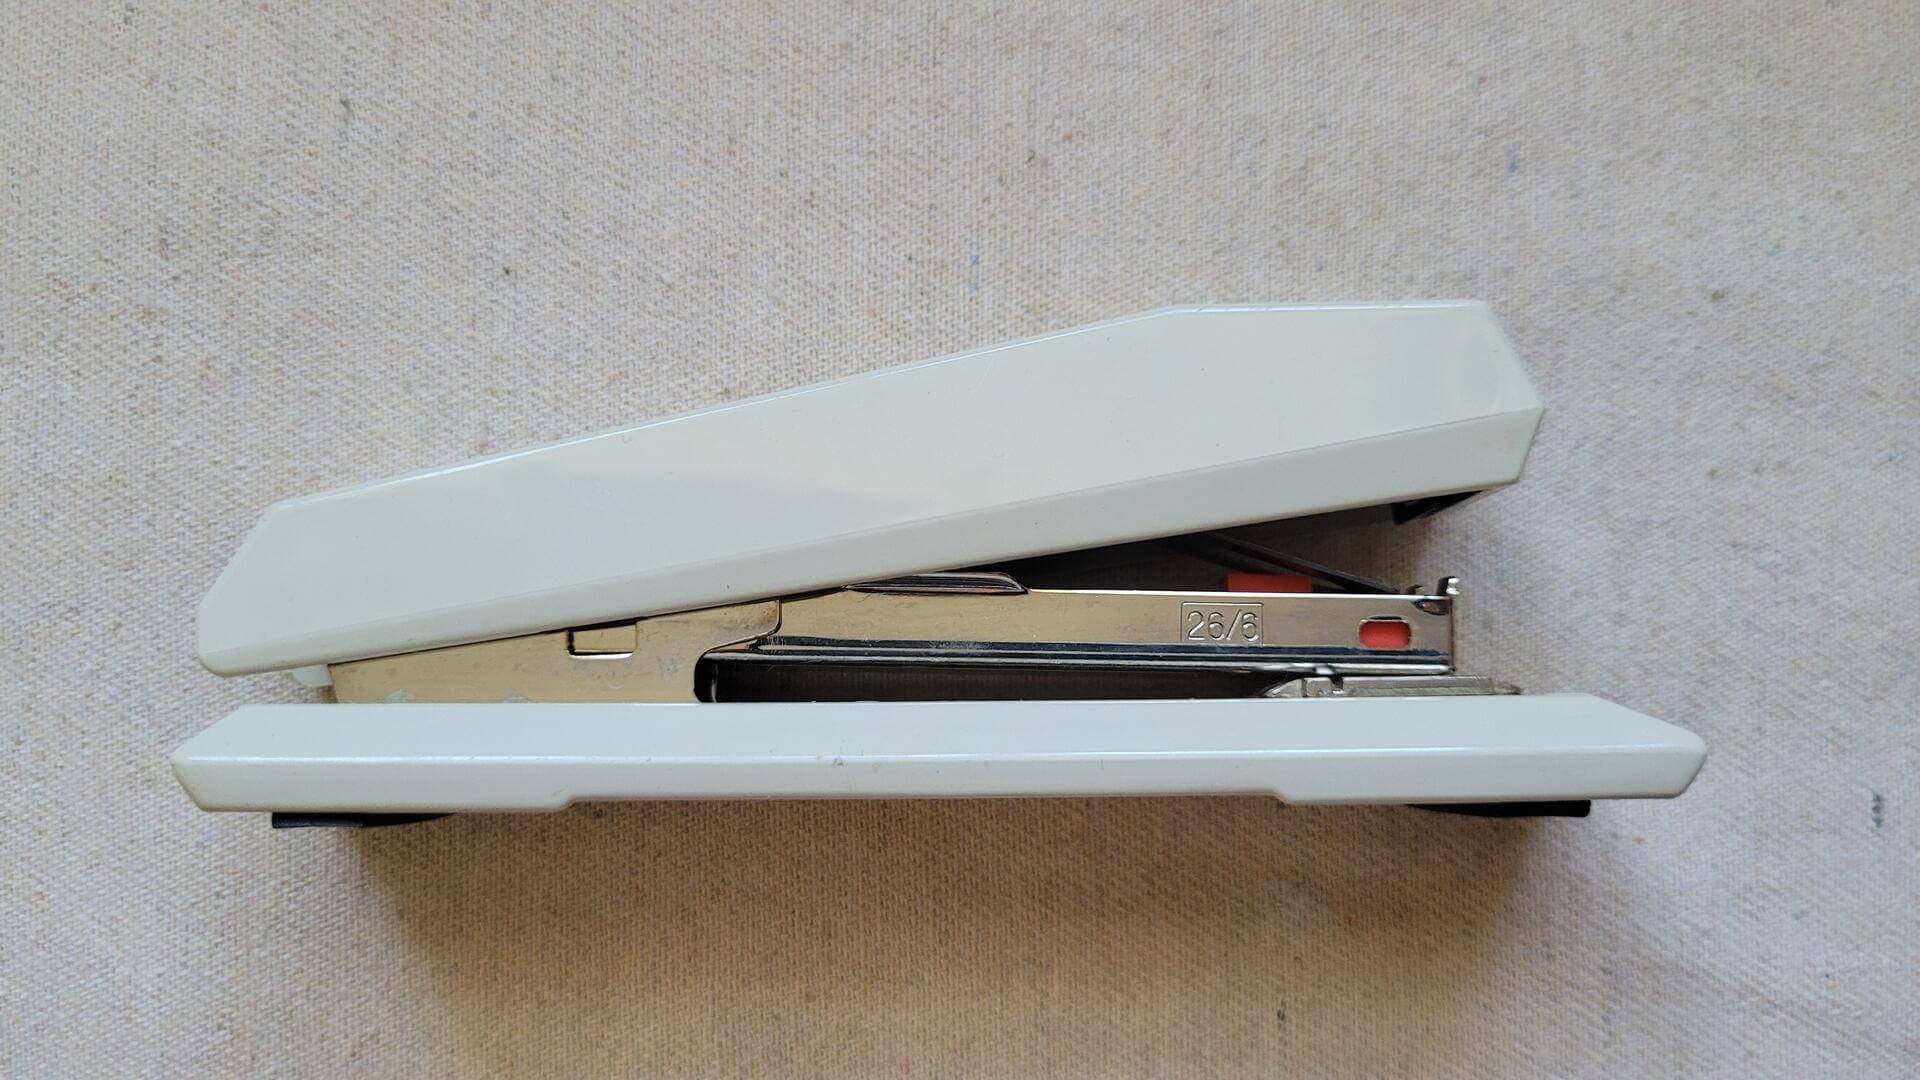 Retro White Apsco 72 Stapler Isaberg AB Hestra Design Made in Sweden - Vintage MCM Paper Staplers and Office Equipment Collectibles